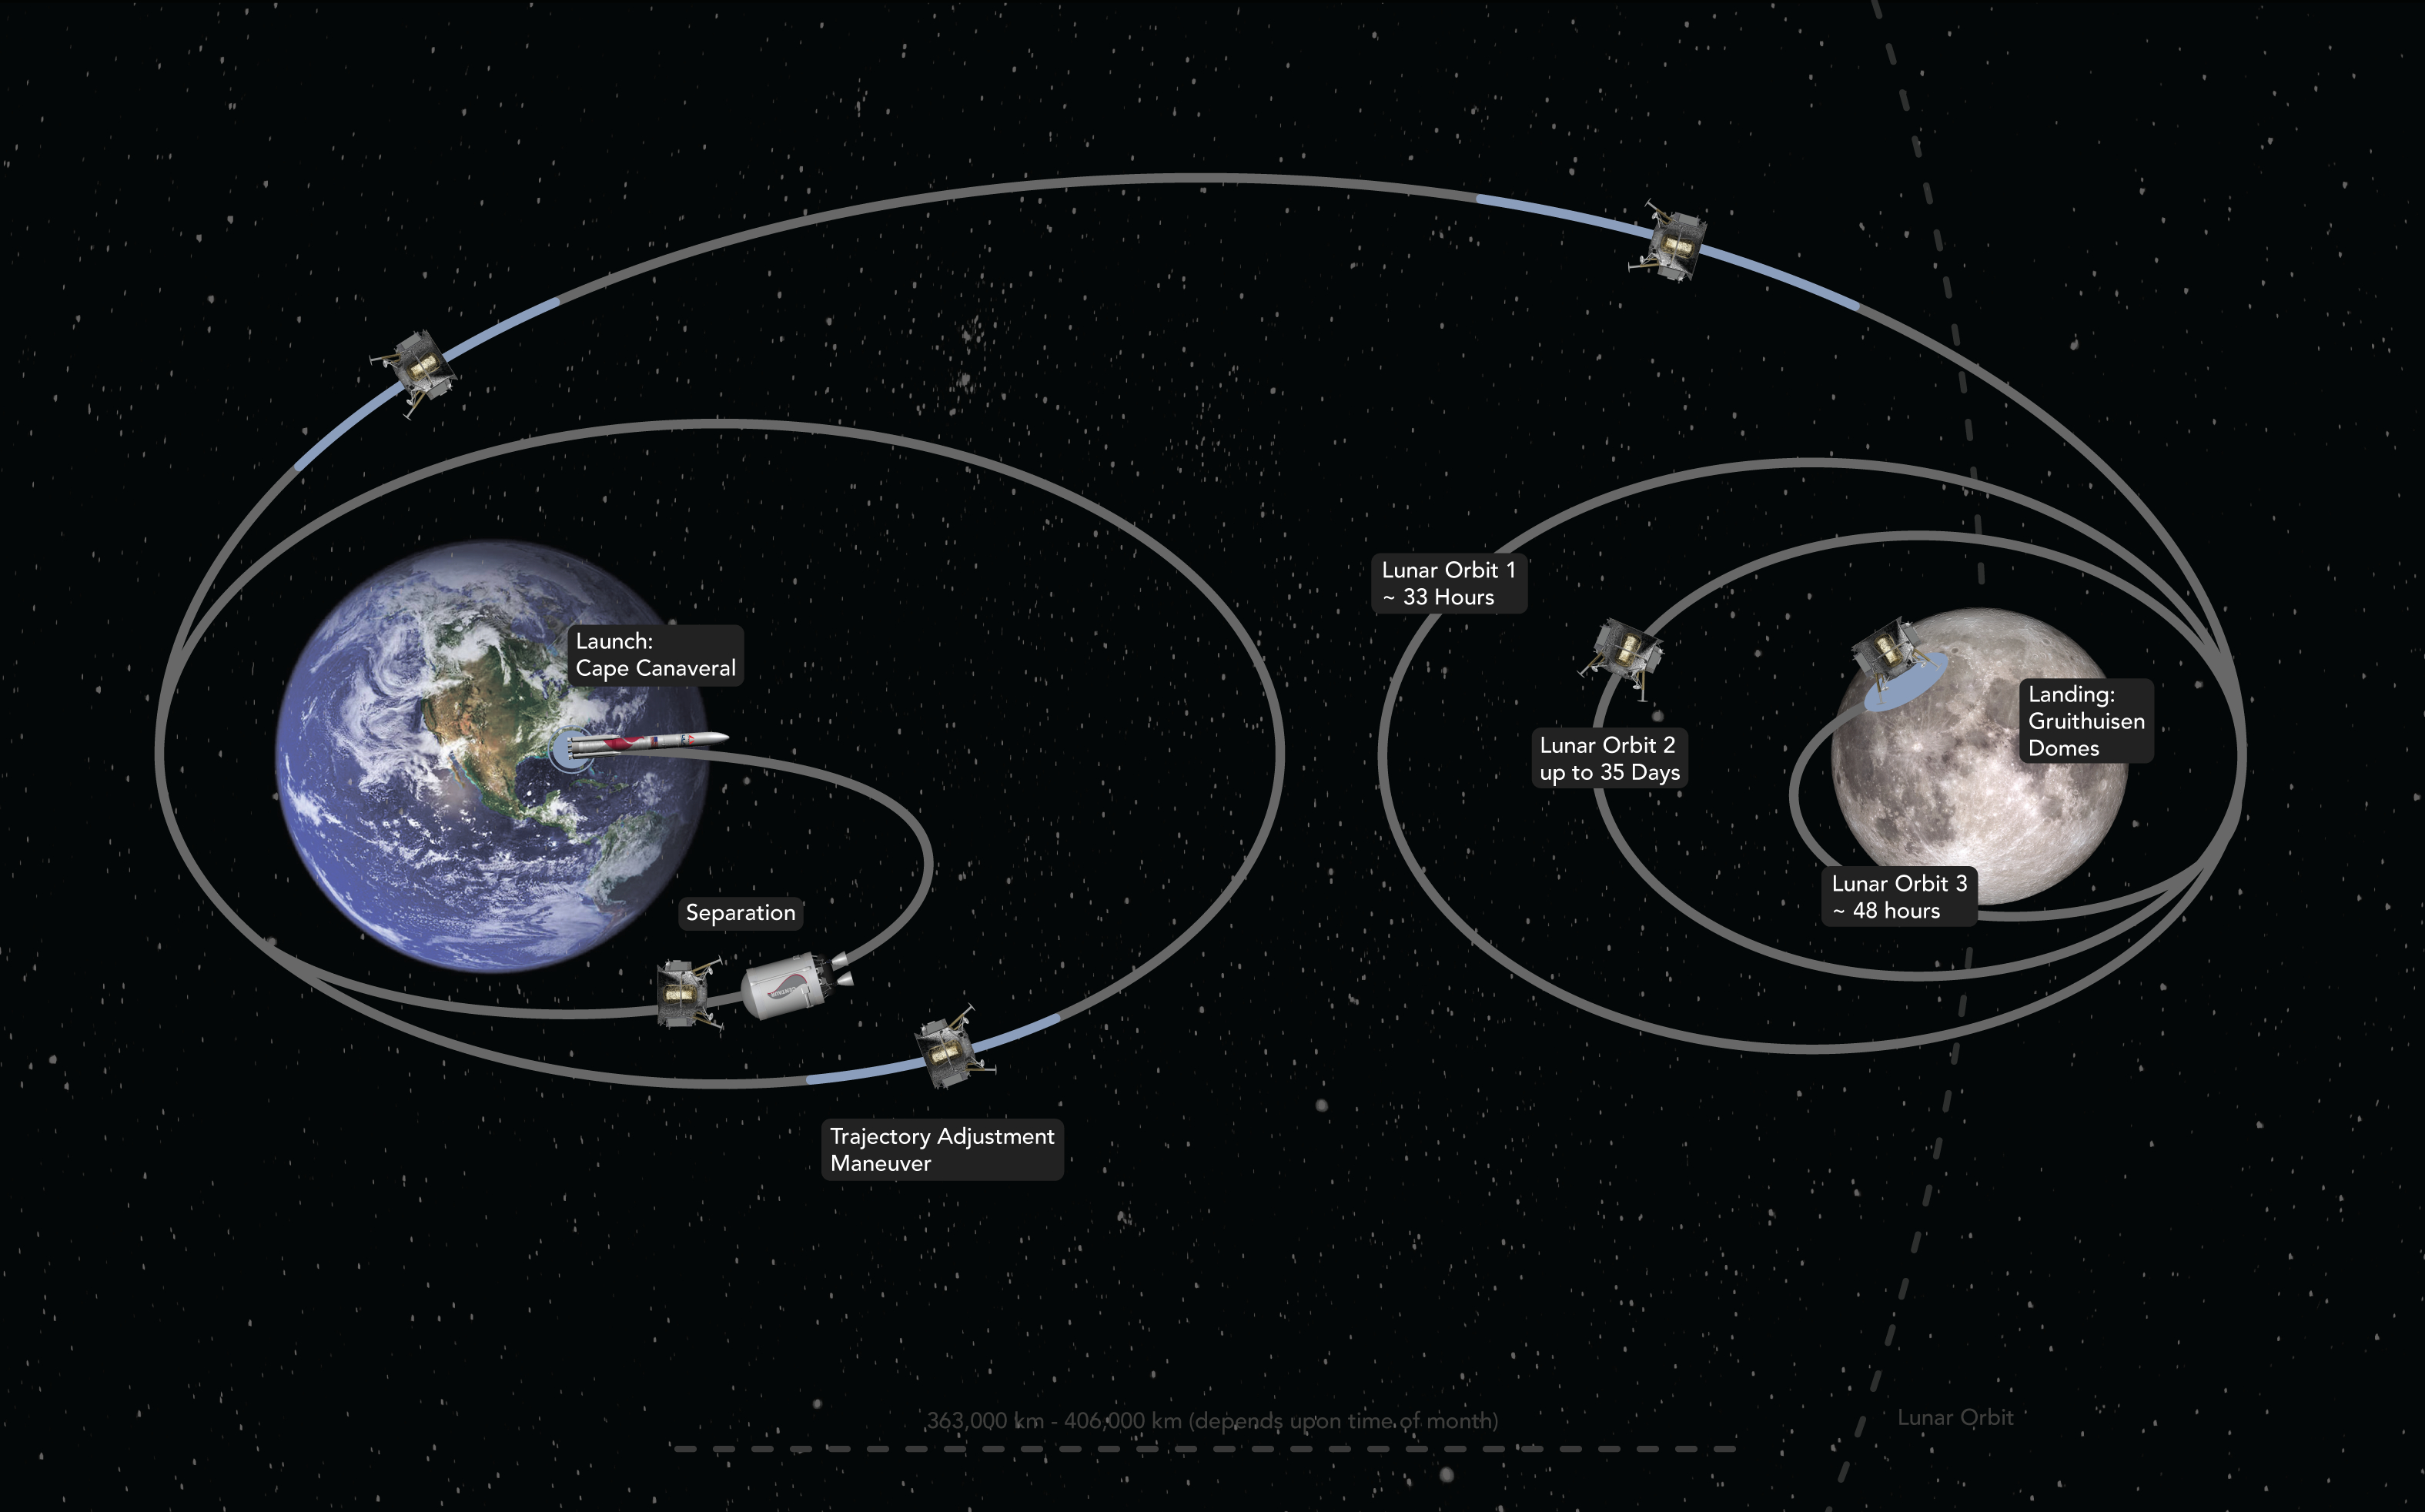 the earth and moon hang adjacent in space as the icons of spacecraft follow outlined orbital paths between the two celestial bodies. the line traces a rocket launch to spacecraft separation to lunar landing.